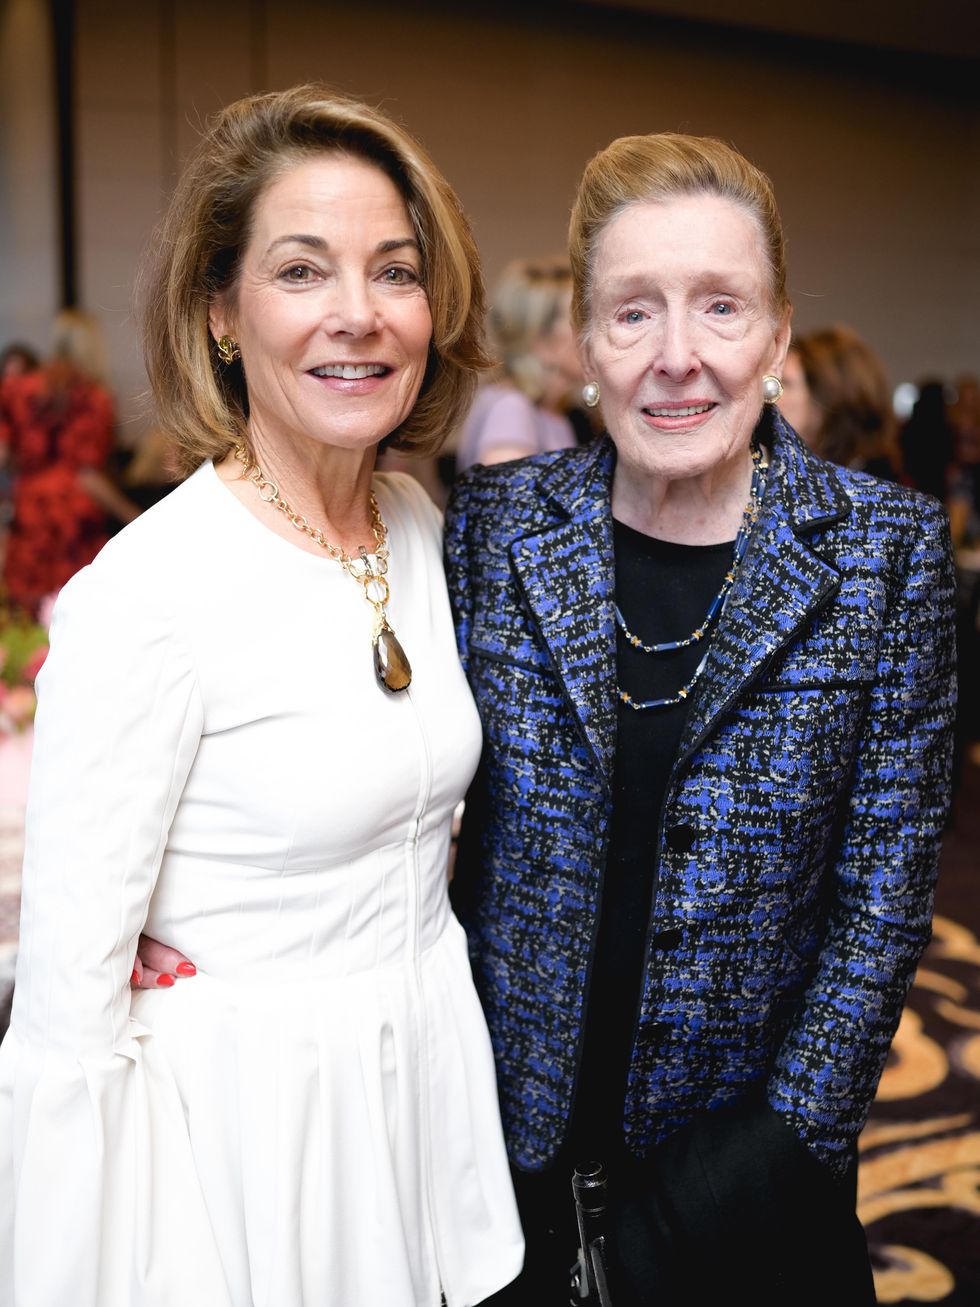 Inside the Central Park Conservancy's Fall Luncheon